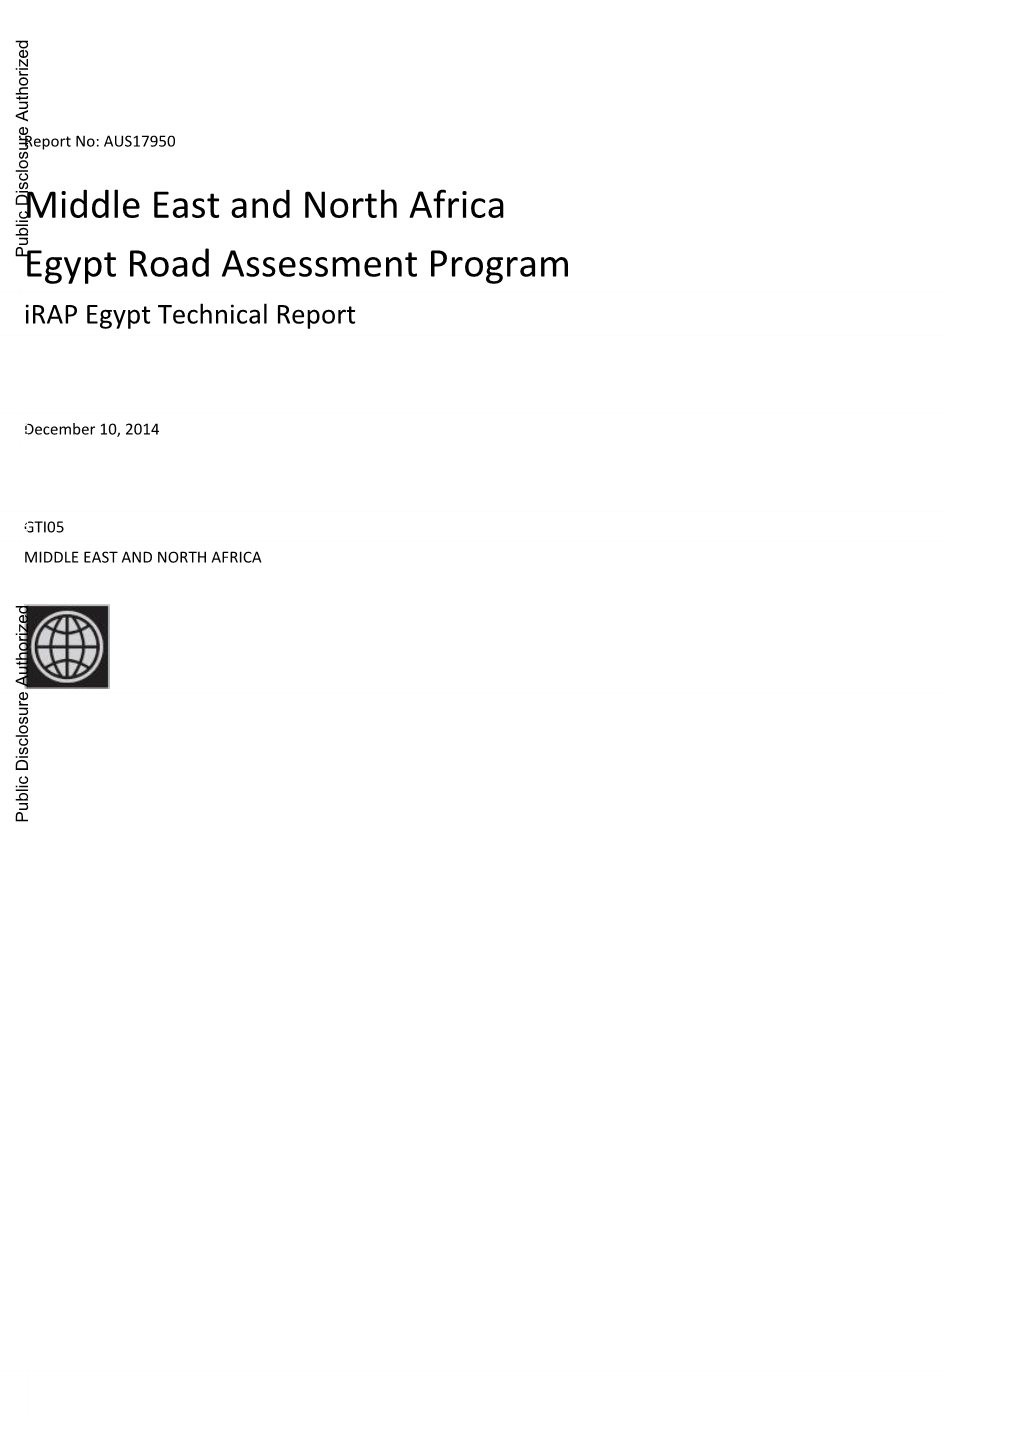 Middle East and North Africa Egypt Road Assessment Program